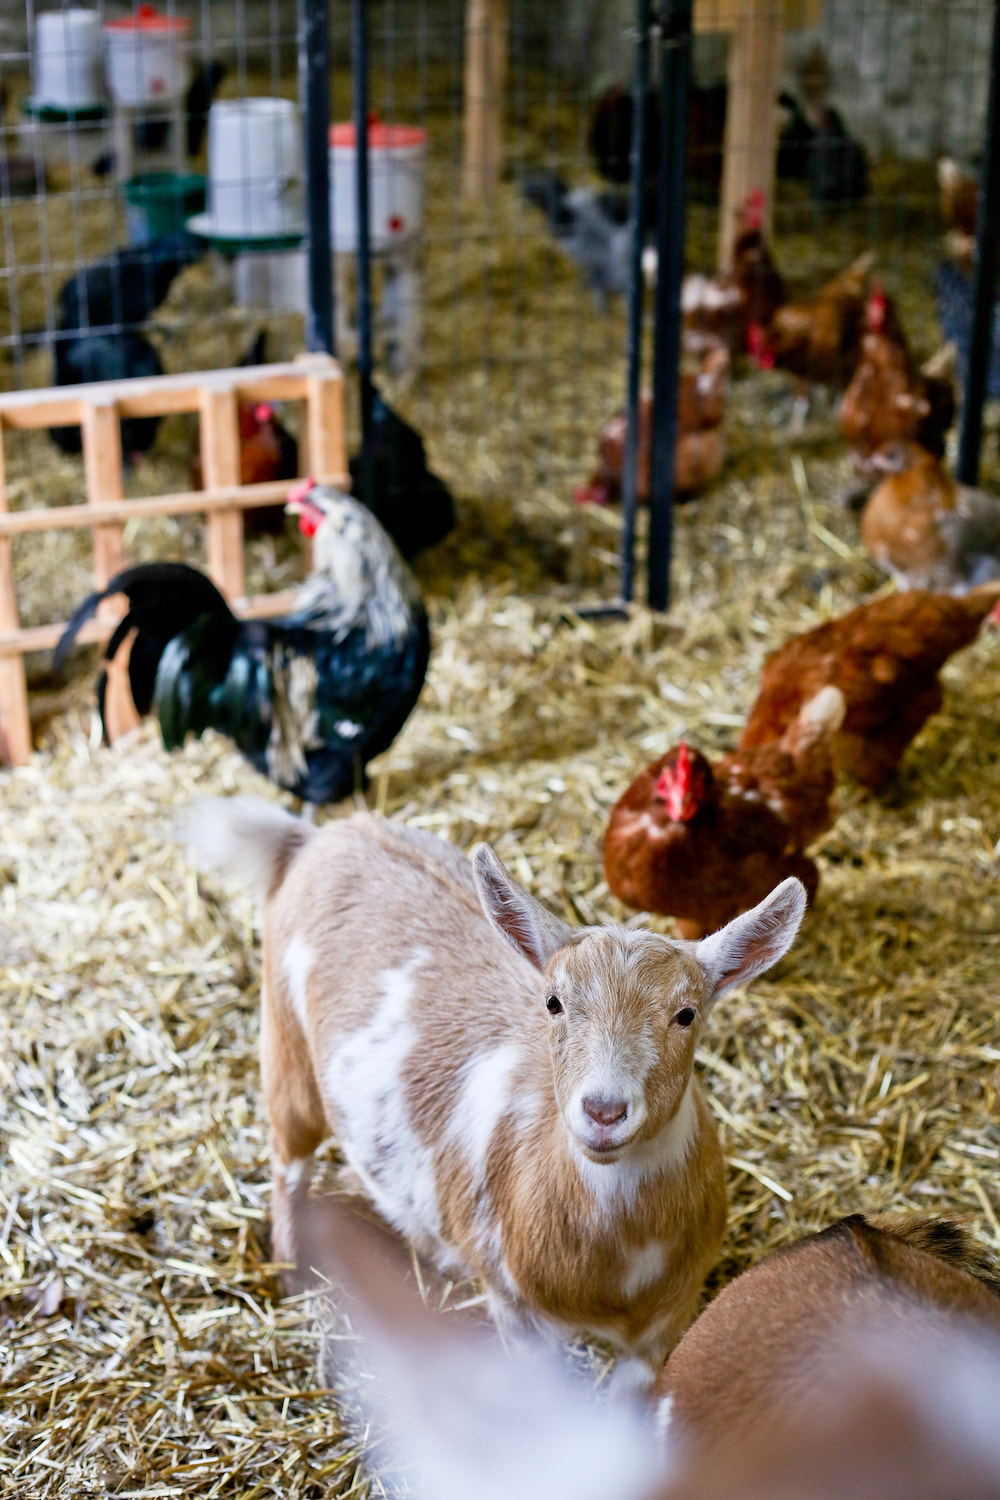 So how do you let chickens in but keep goats out? ​